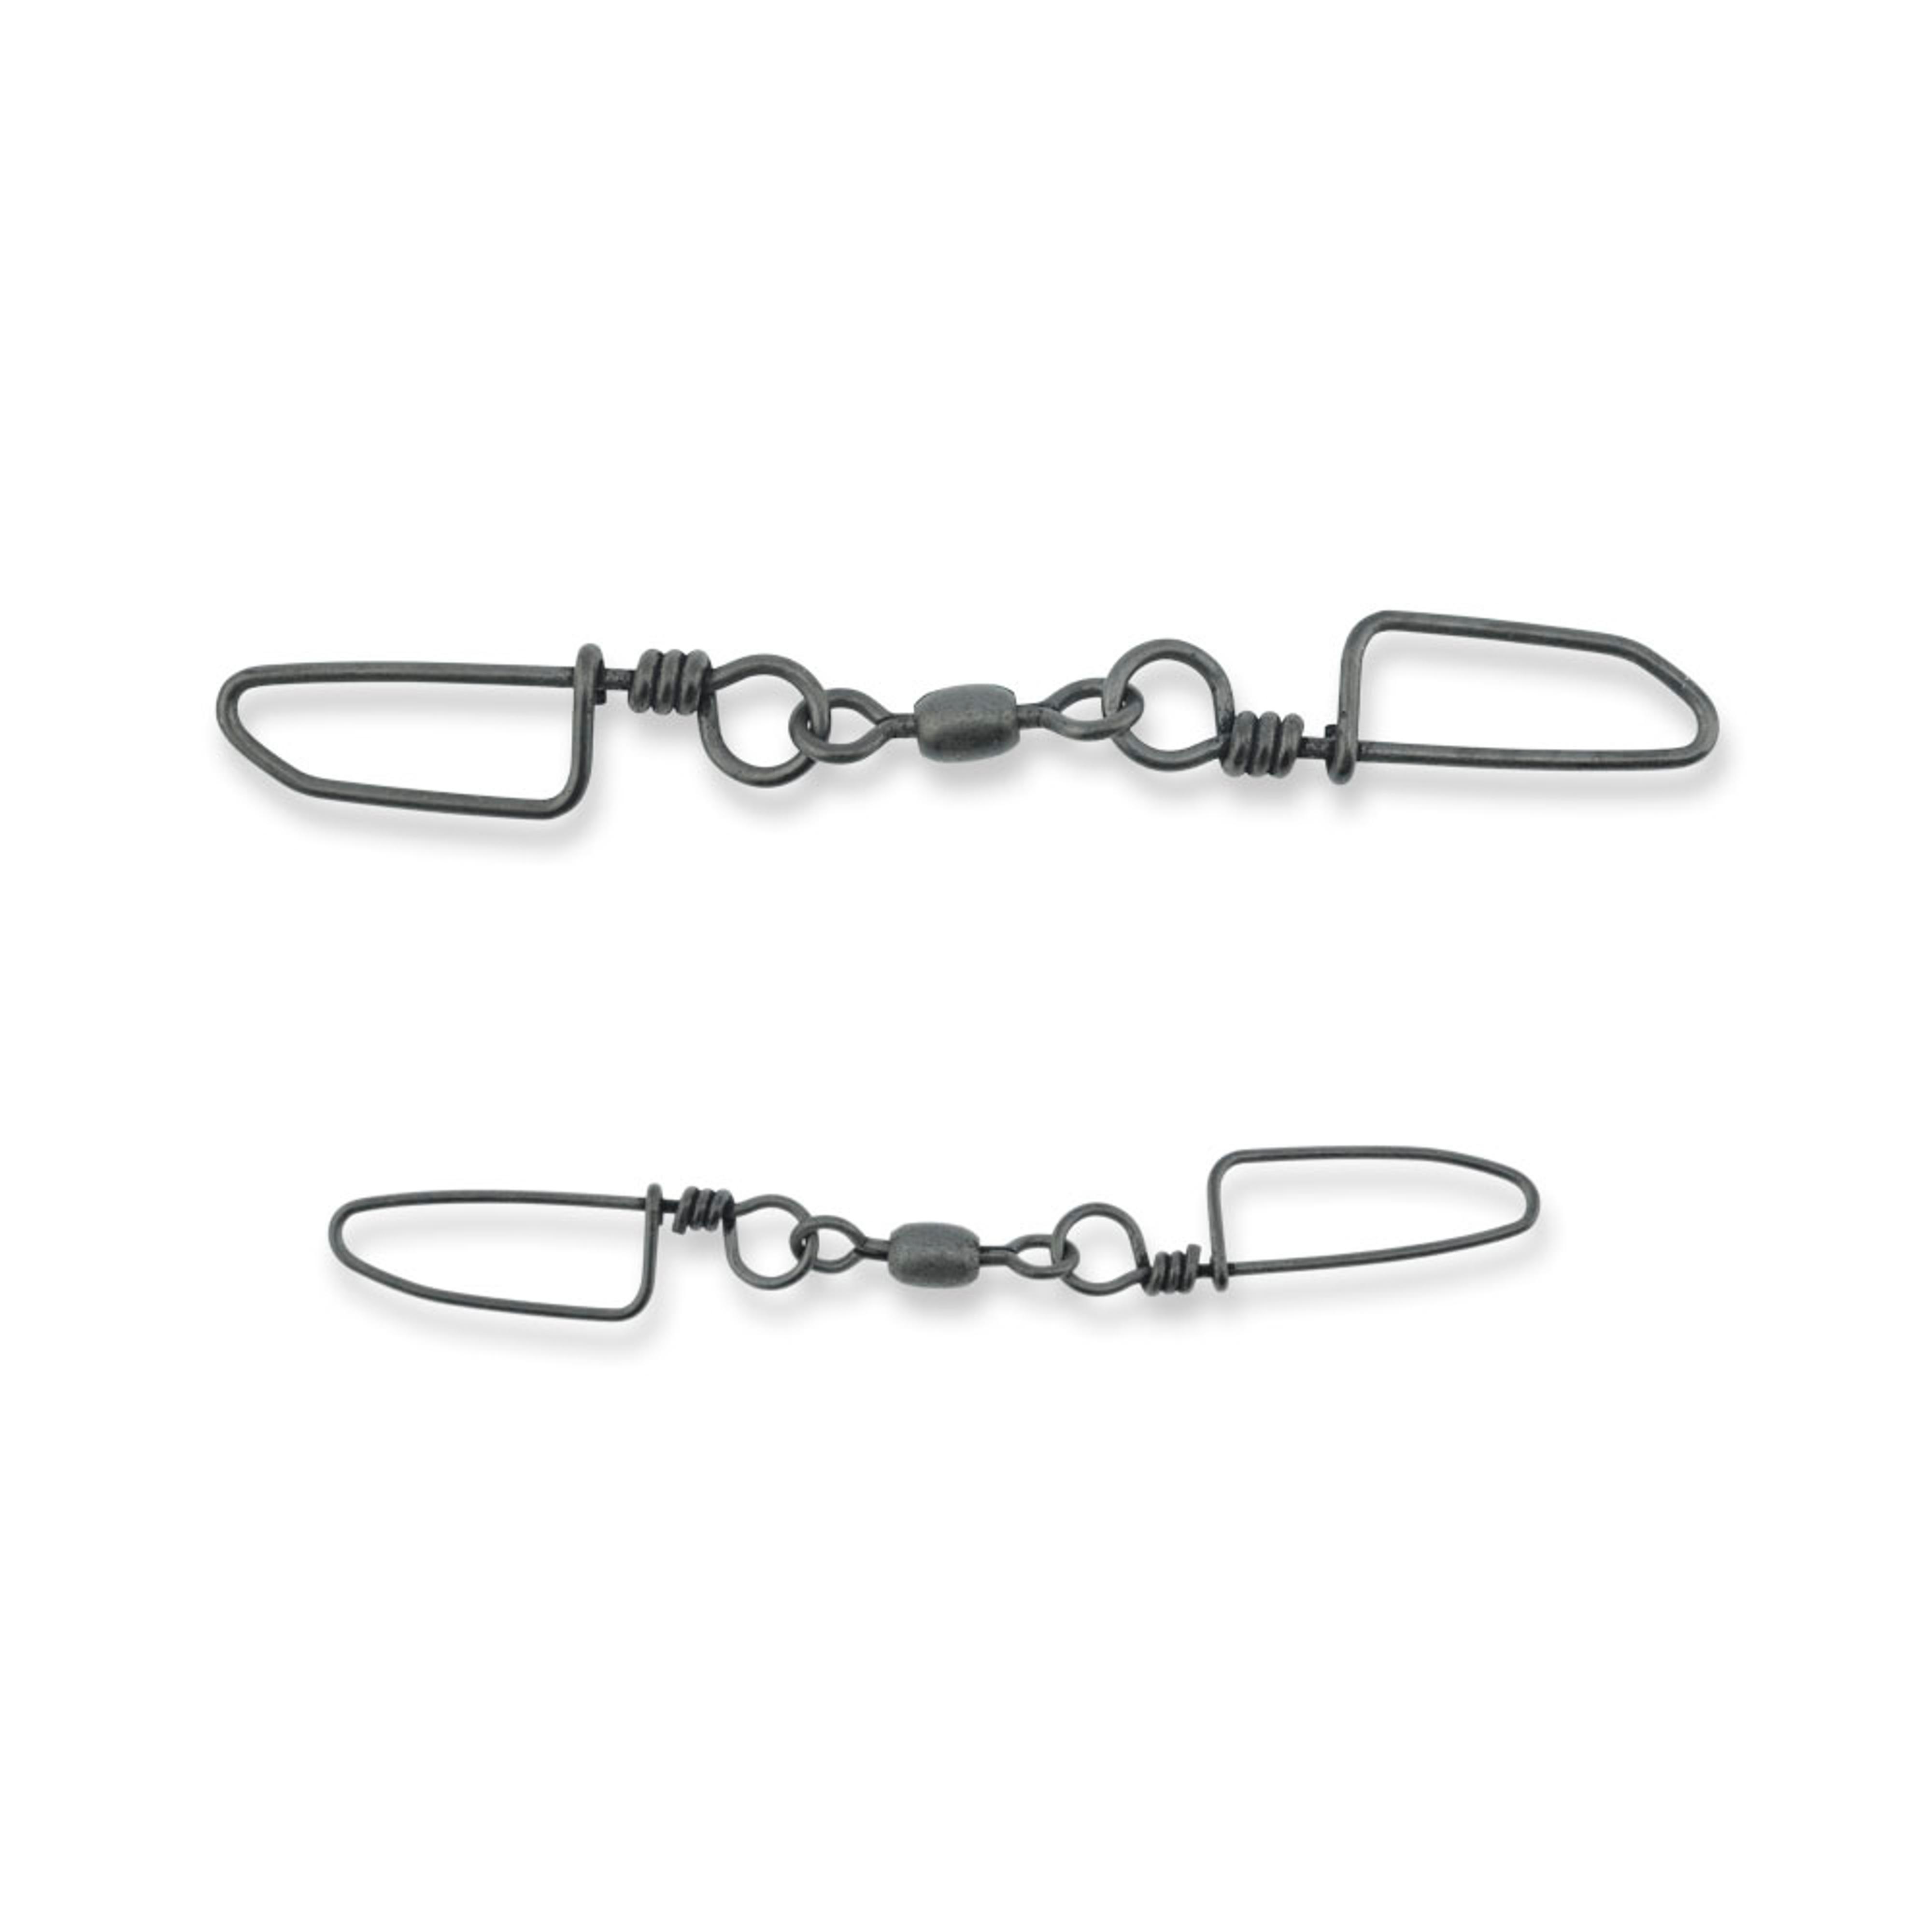 Falcon Tackle Ball Bearing Snap Swivels, Size 4 from The Fishin' Hole